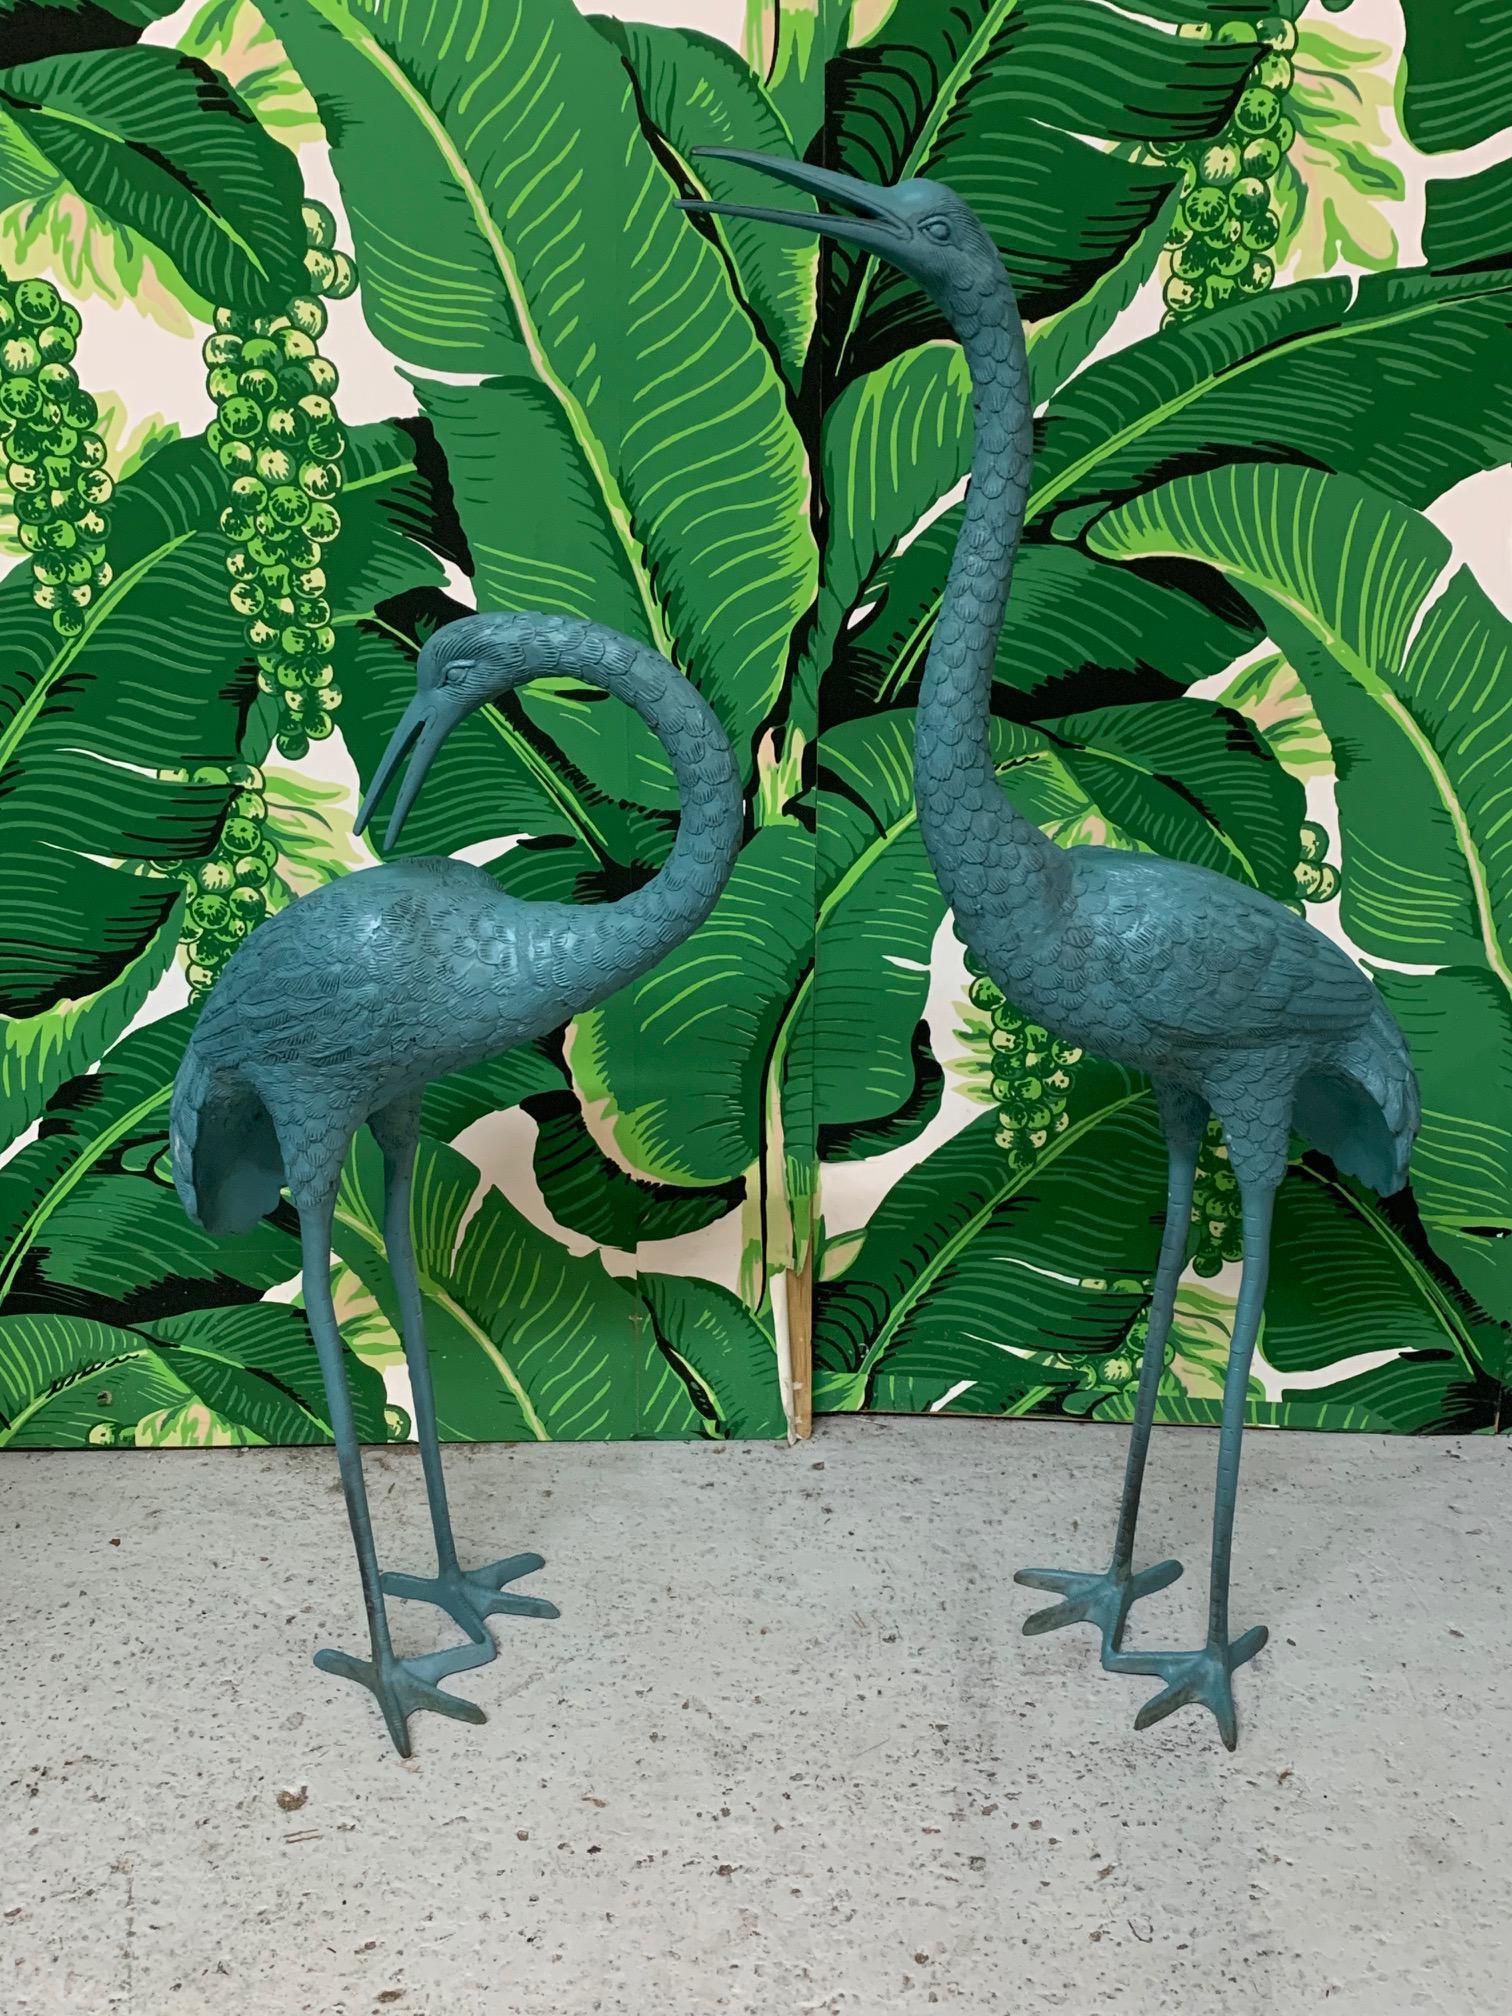 Pair of heavy large metal heron/crane/egret statues finished in light blue, a perfect compliment for your indoor or outdoor decor. Good condition with minor imperfections consistent with age, see photos for condition details. Large bird measures 6